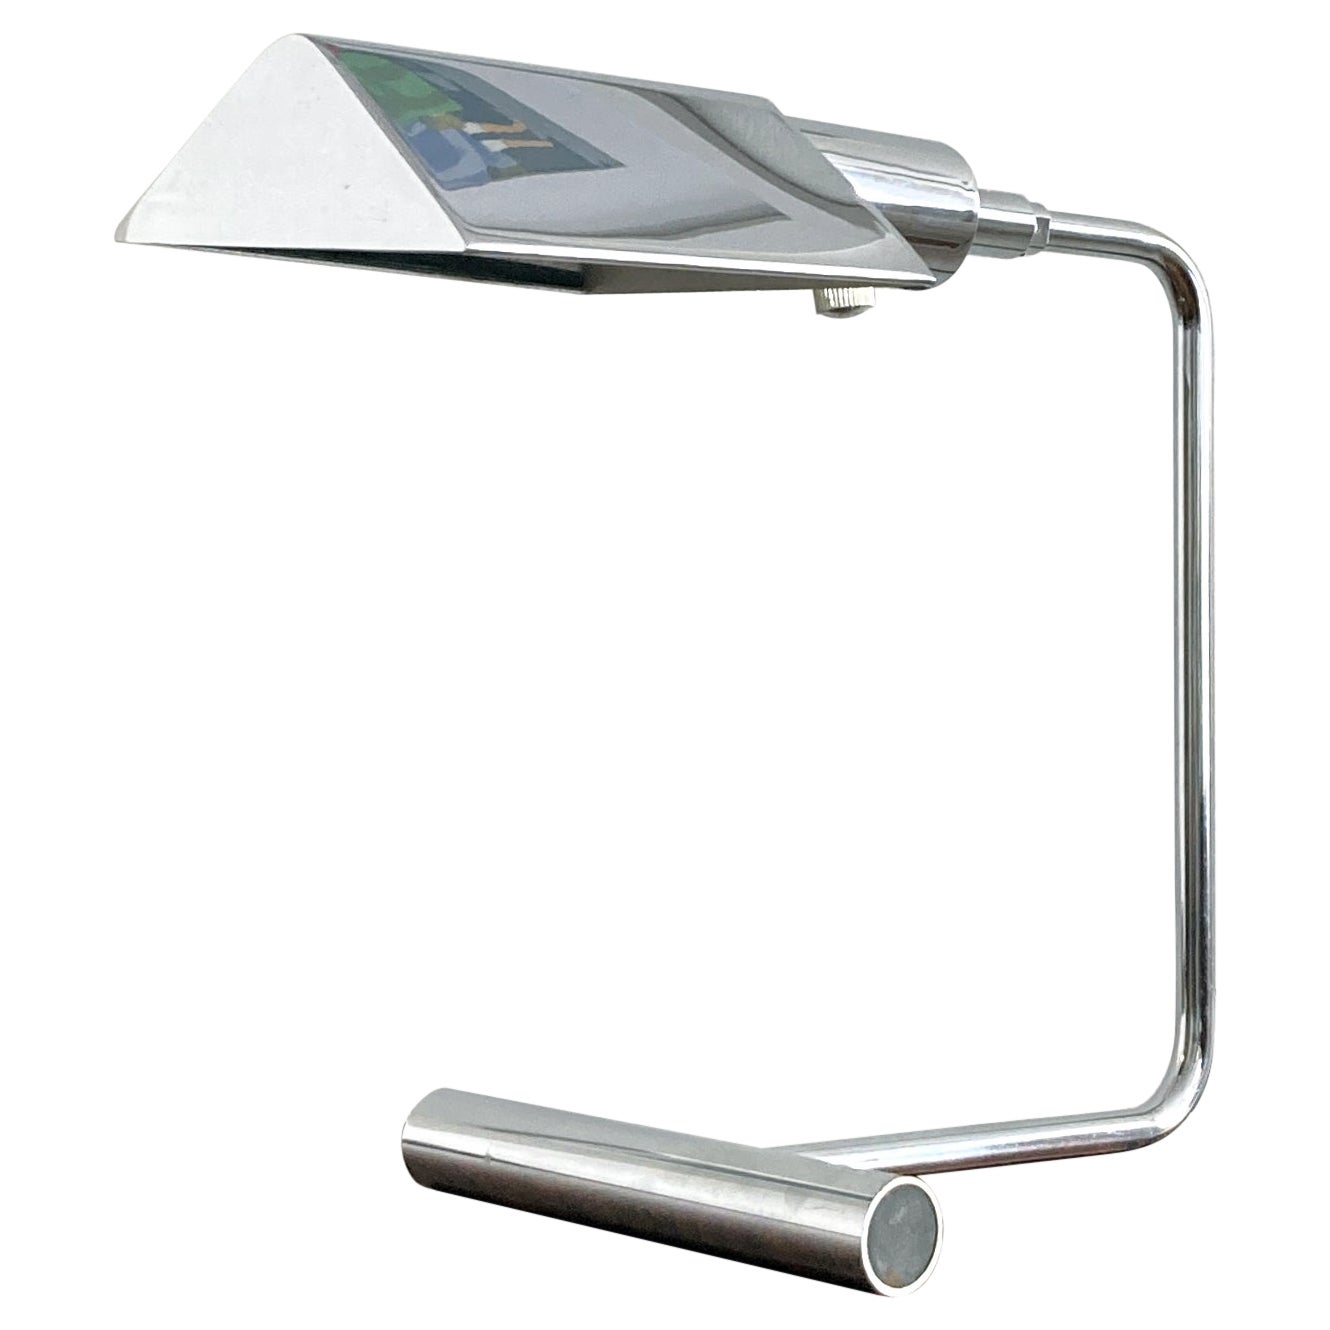 Stunning desk lamp/ reading lamp by Koch & Lowy, signed OMI. Features a pivoting chrome shade with dimmer knob. In good working condition.

The voltage is 110, standard US plug. The lamp has been rewired since the 1960's, it has an Edison socket and